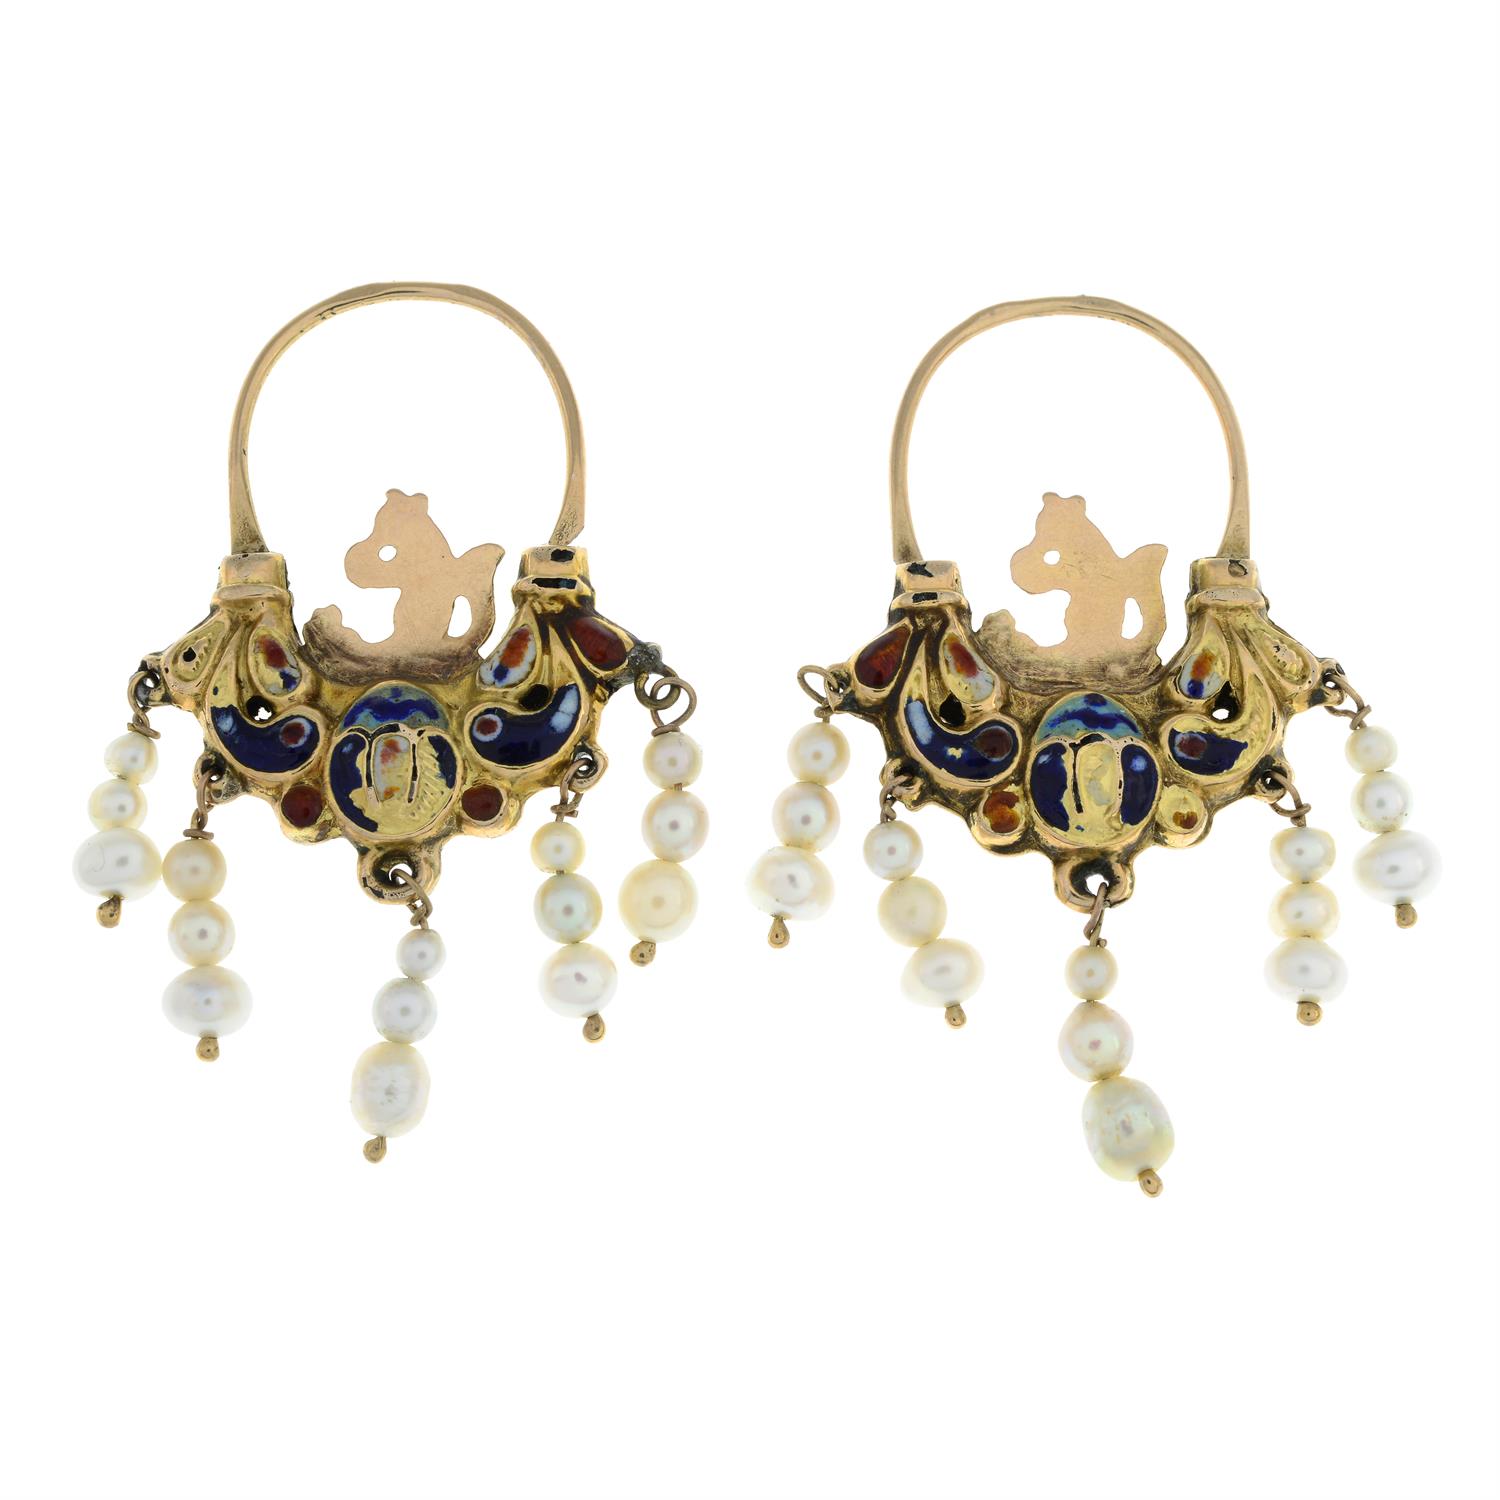 19th century gold enamel and cultured pearl earrings - Image 3 of 3